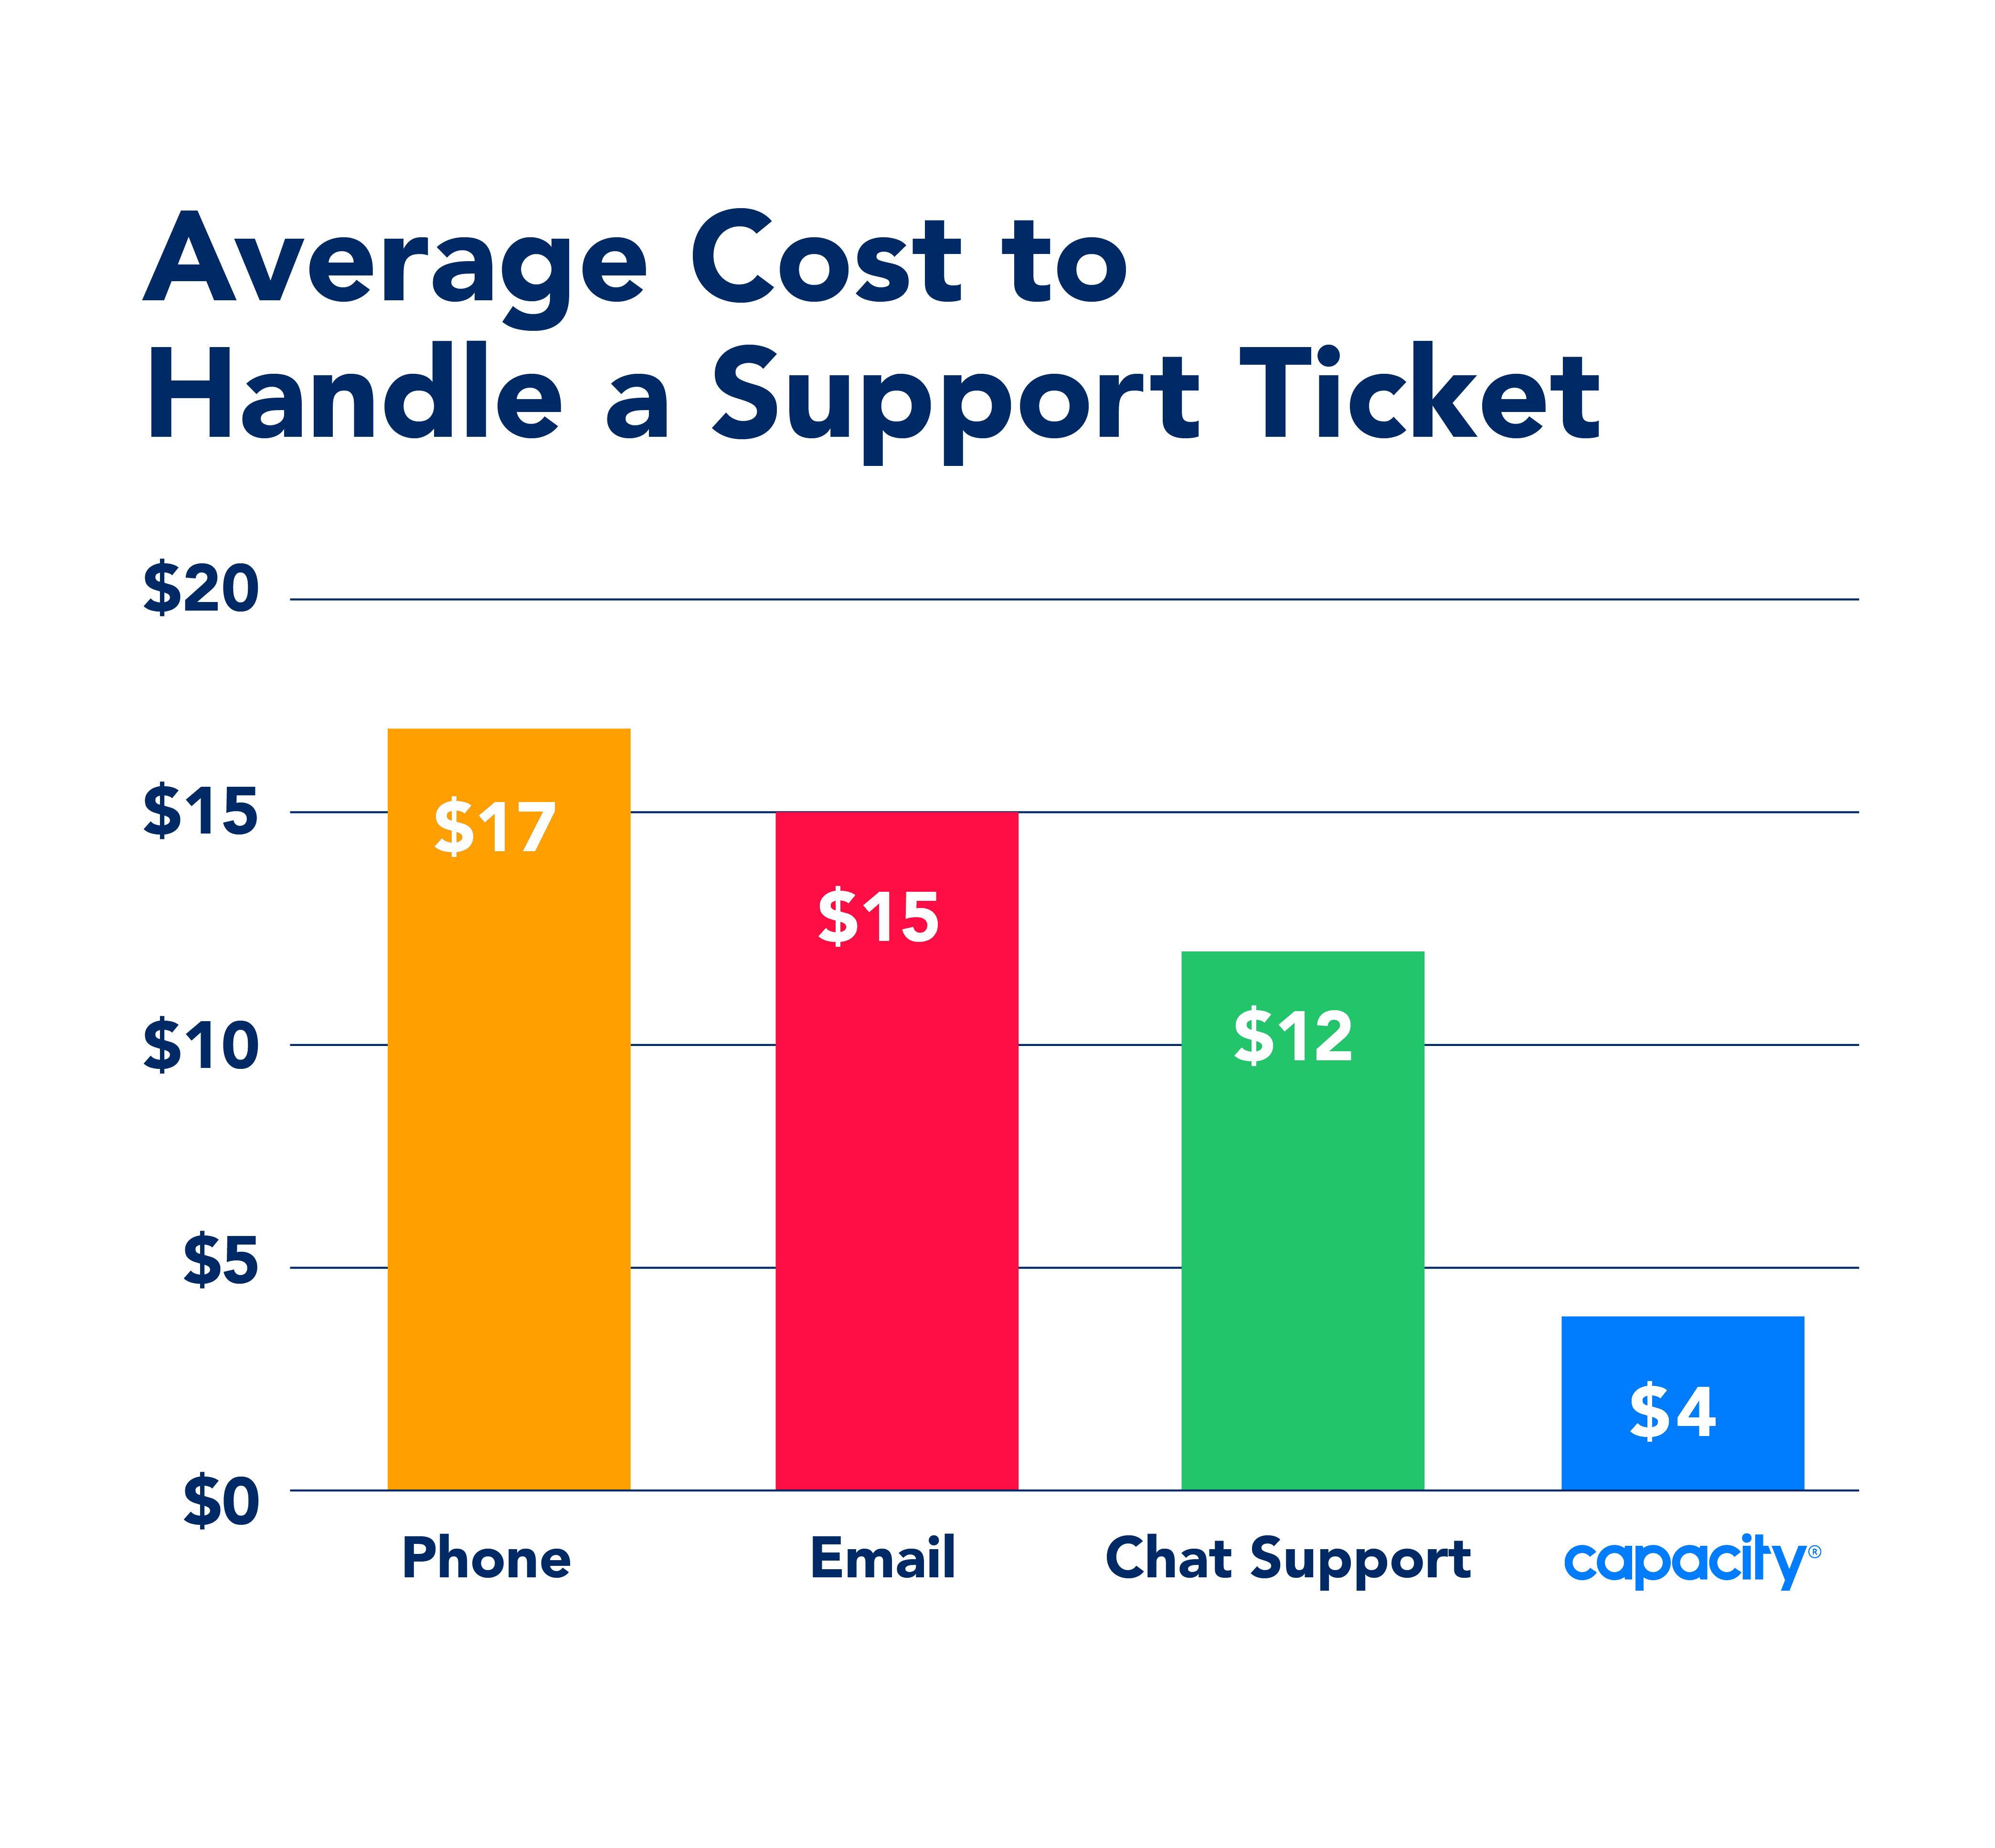 Graph showing the average cost to handle a support ticket. Using a phone to handle a ticket costs $17, email costs $15, chat support costs $12, and Capacity costs $4